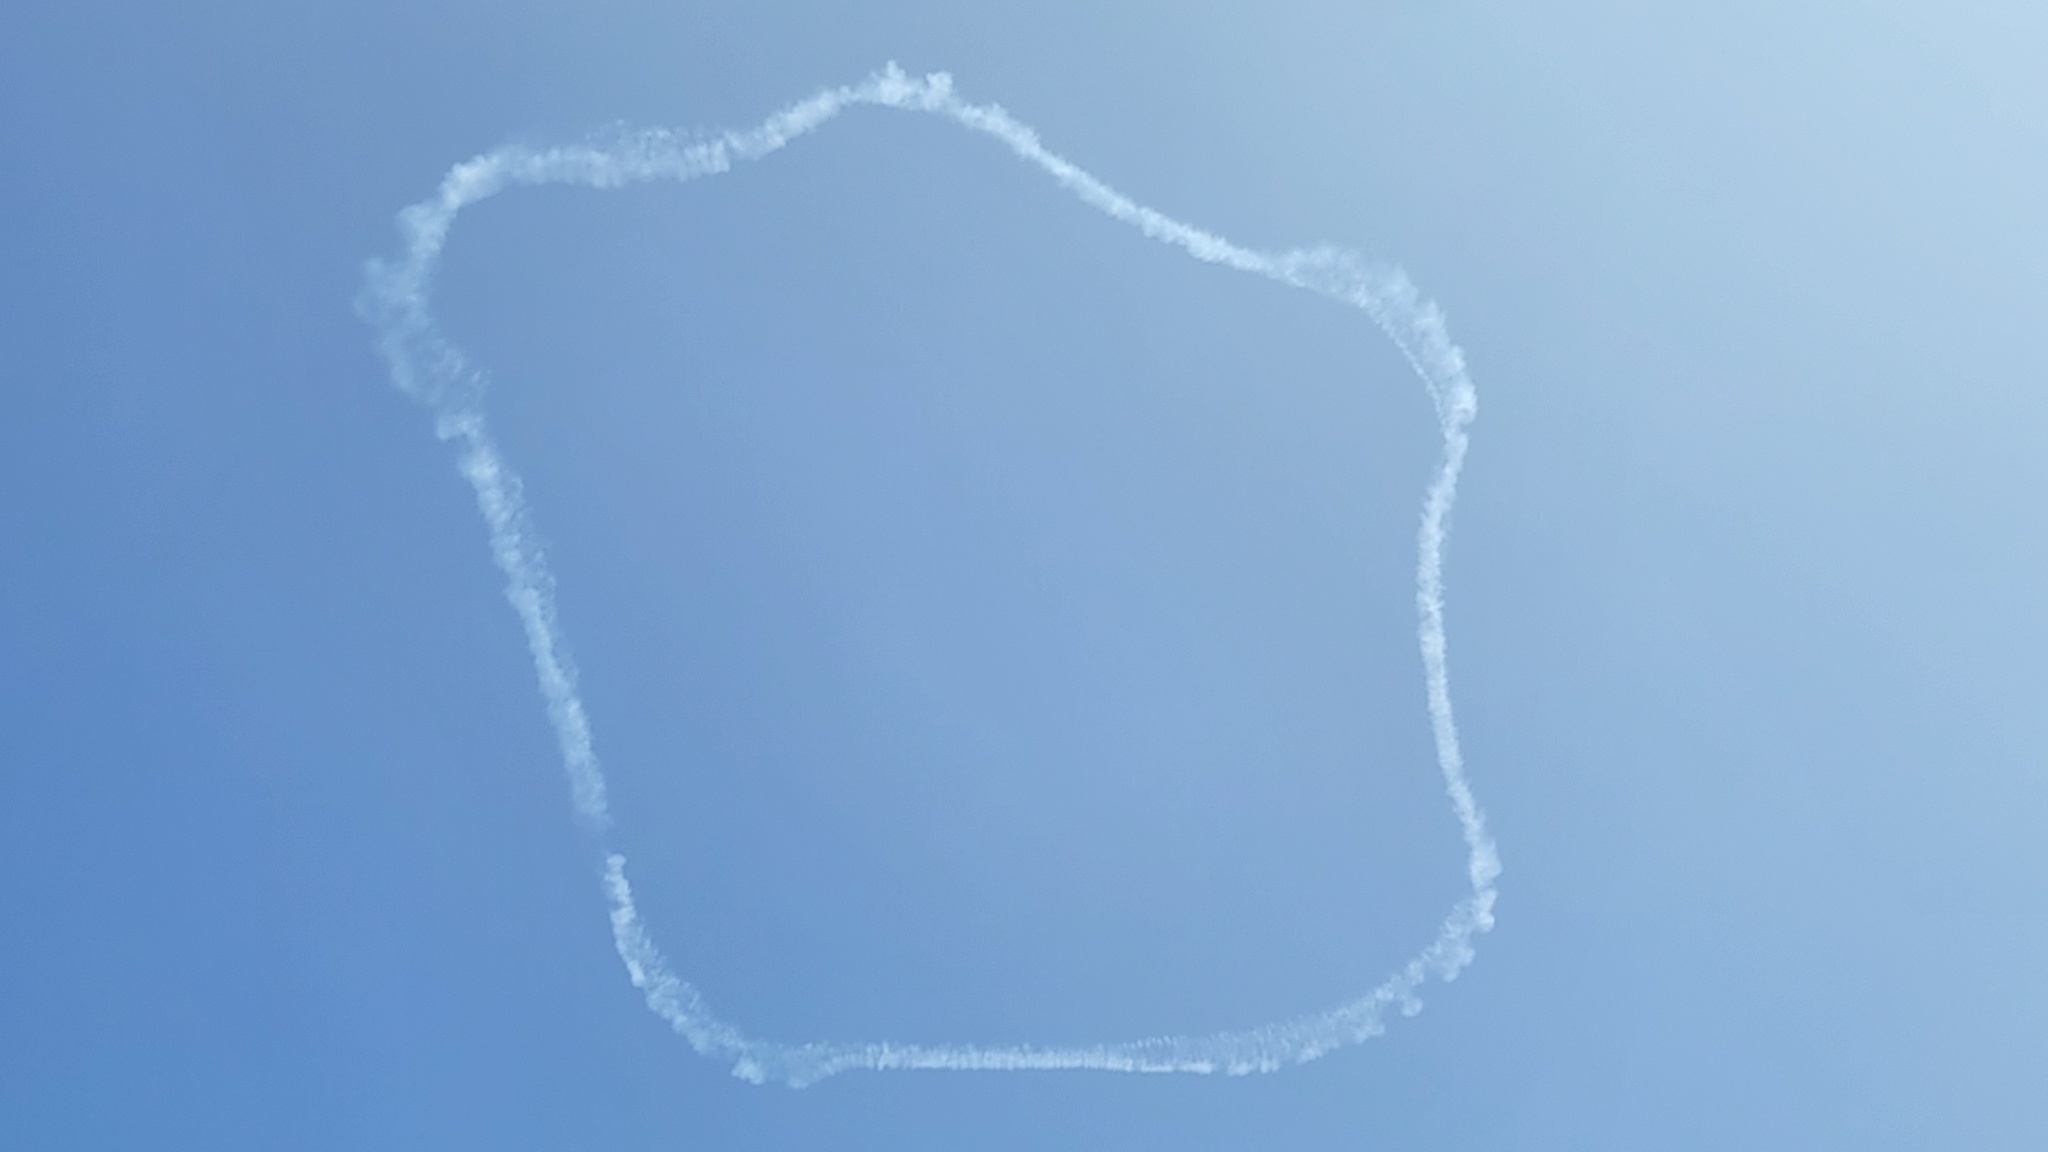 Thin clouds created by a skywriting airplane delimit a roughly square area in the middle of a blue sky, seen from directly below.